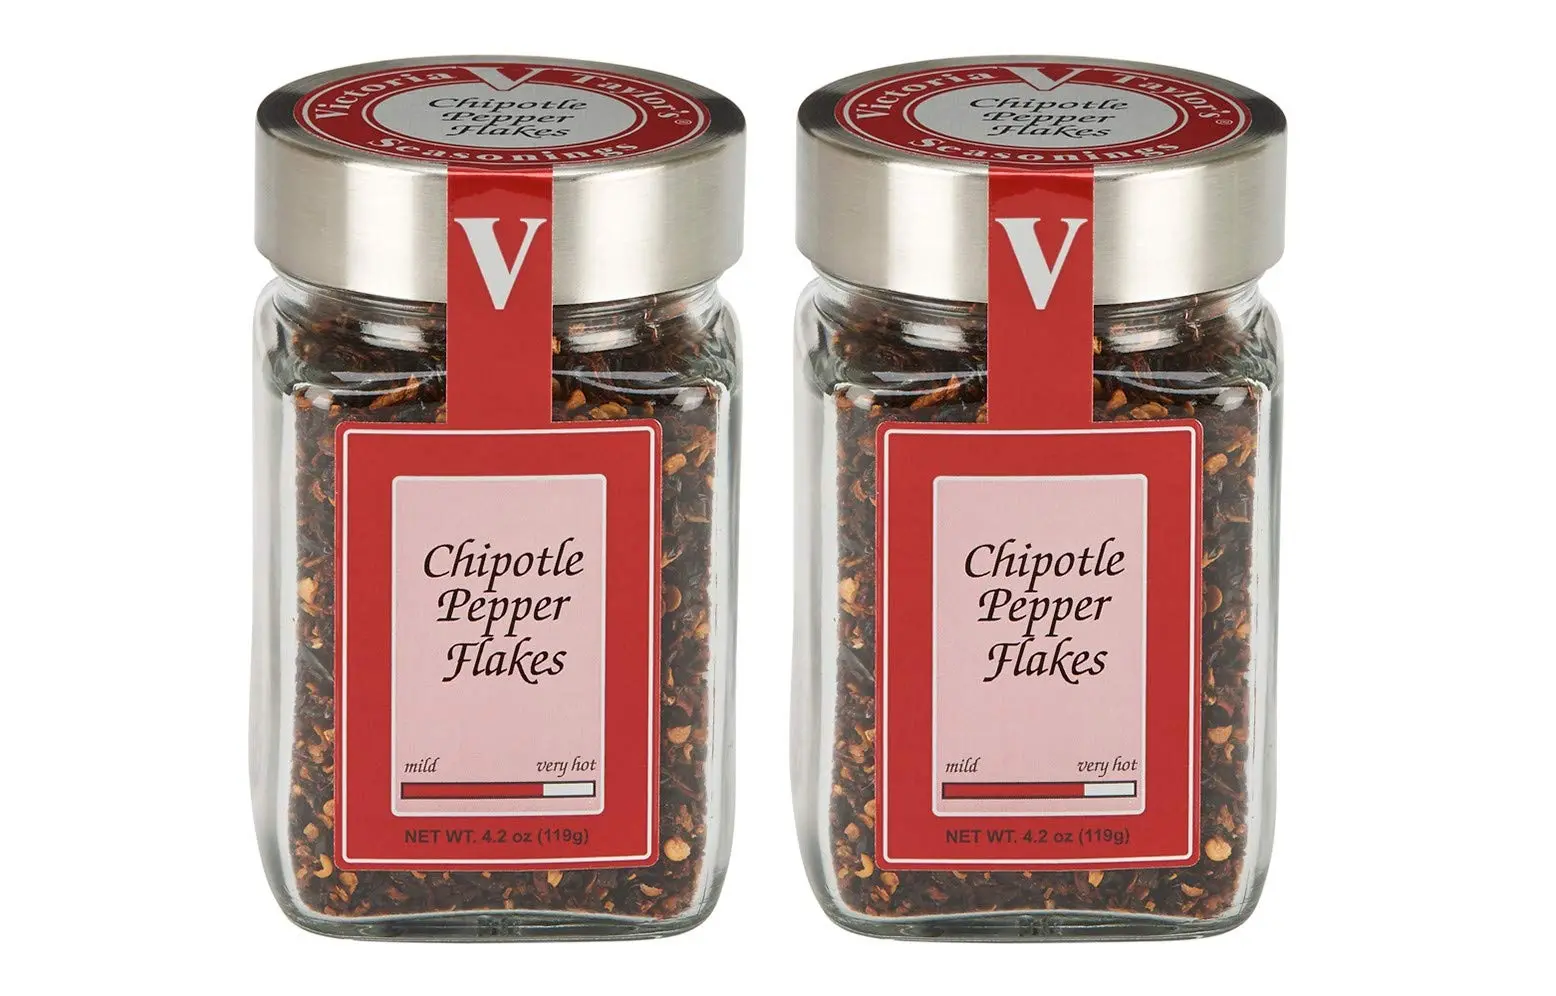 smoked chipotle flakes - What's the difference between chilli flakes and chipotle chilli flakes